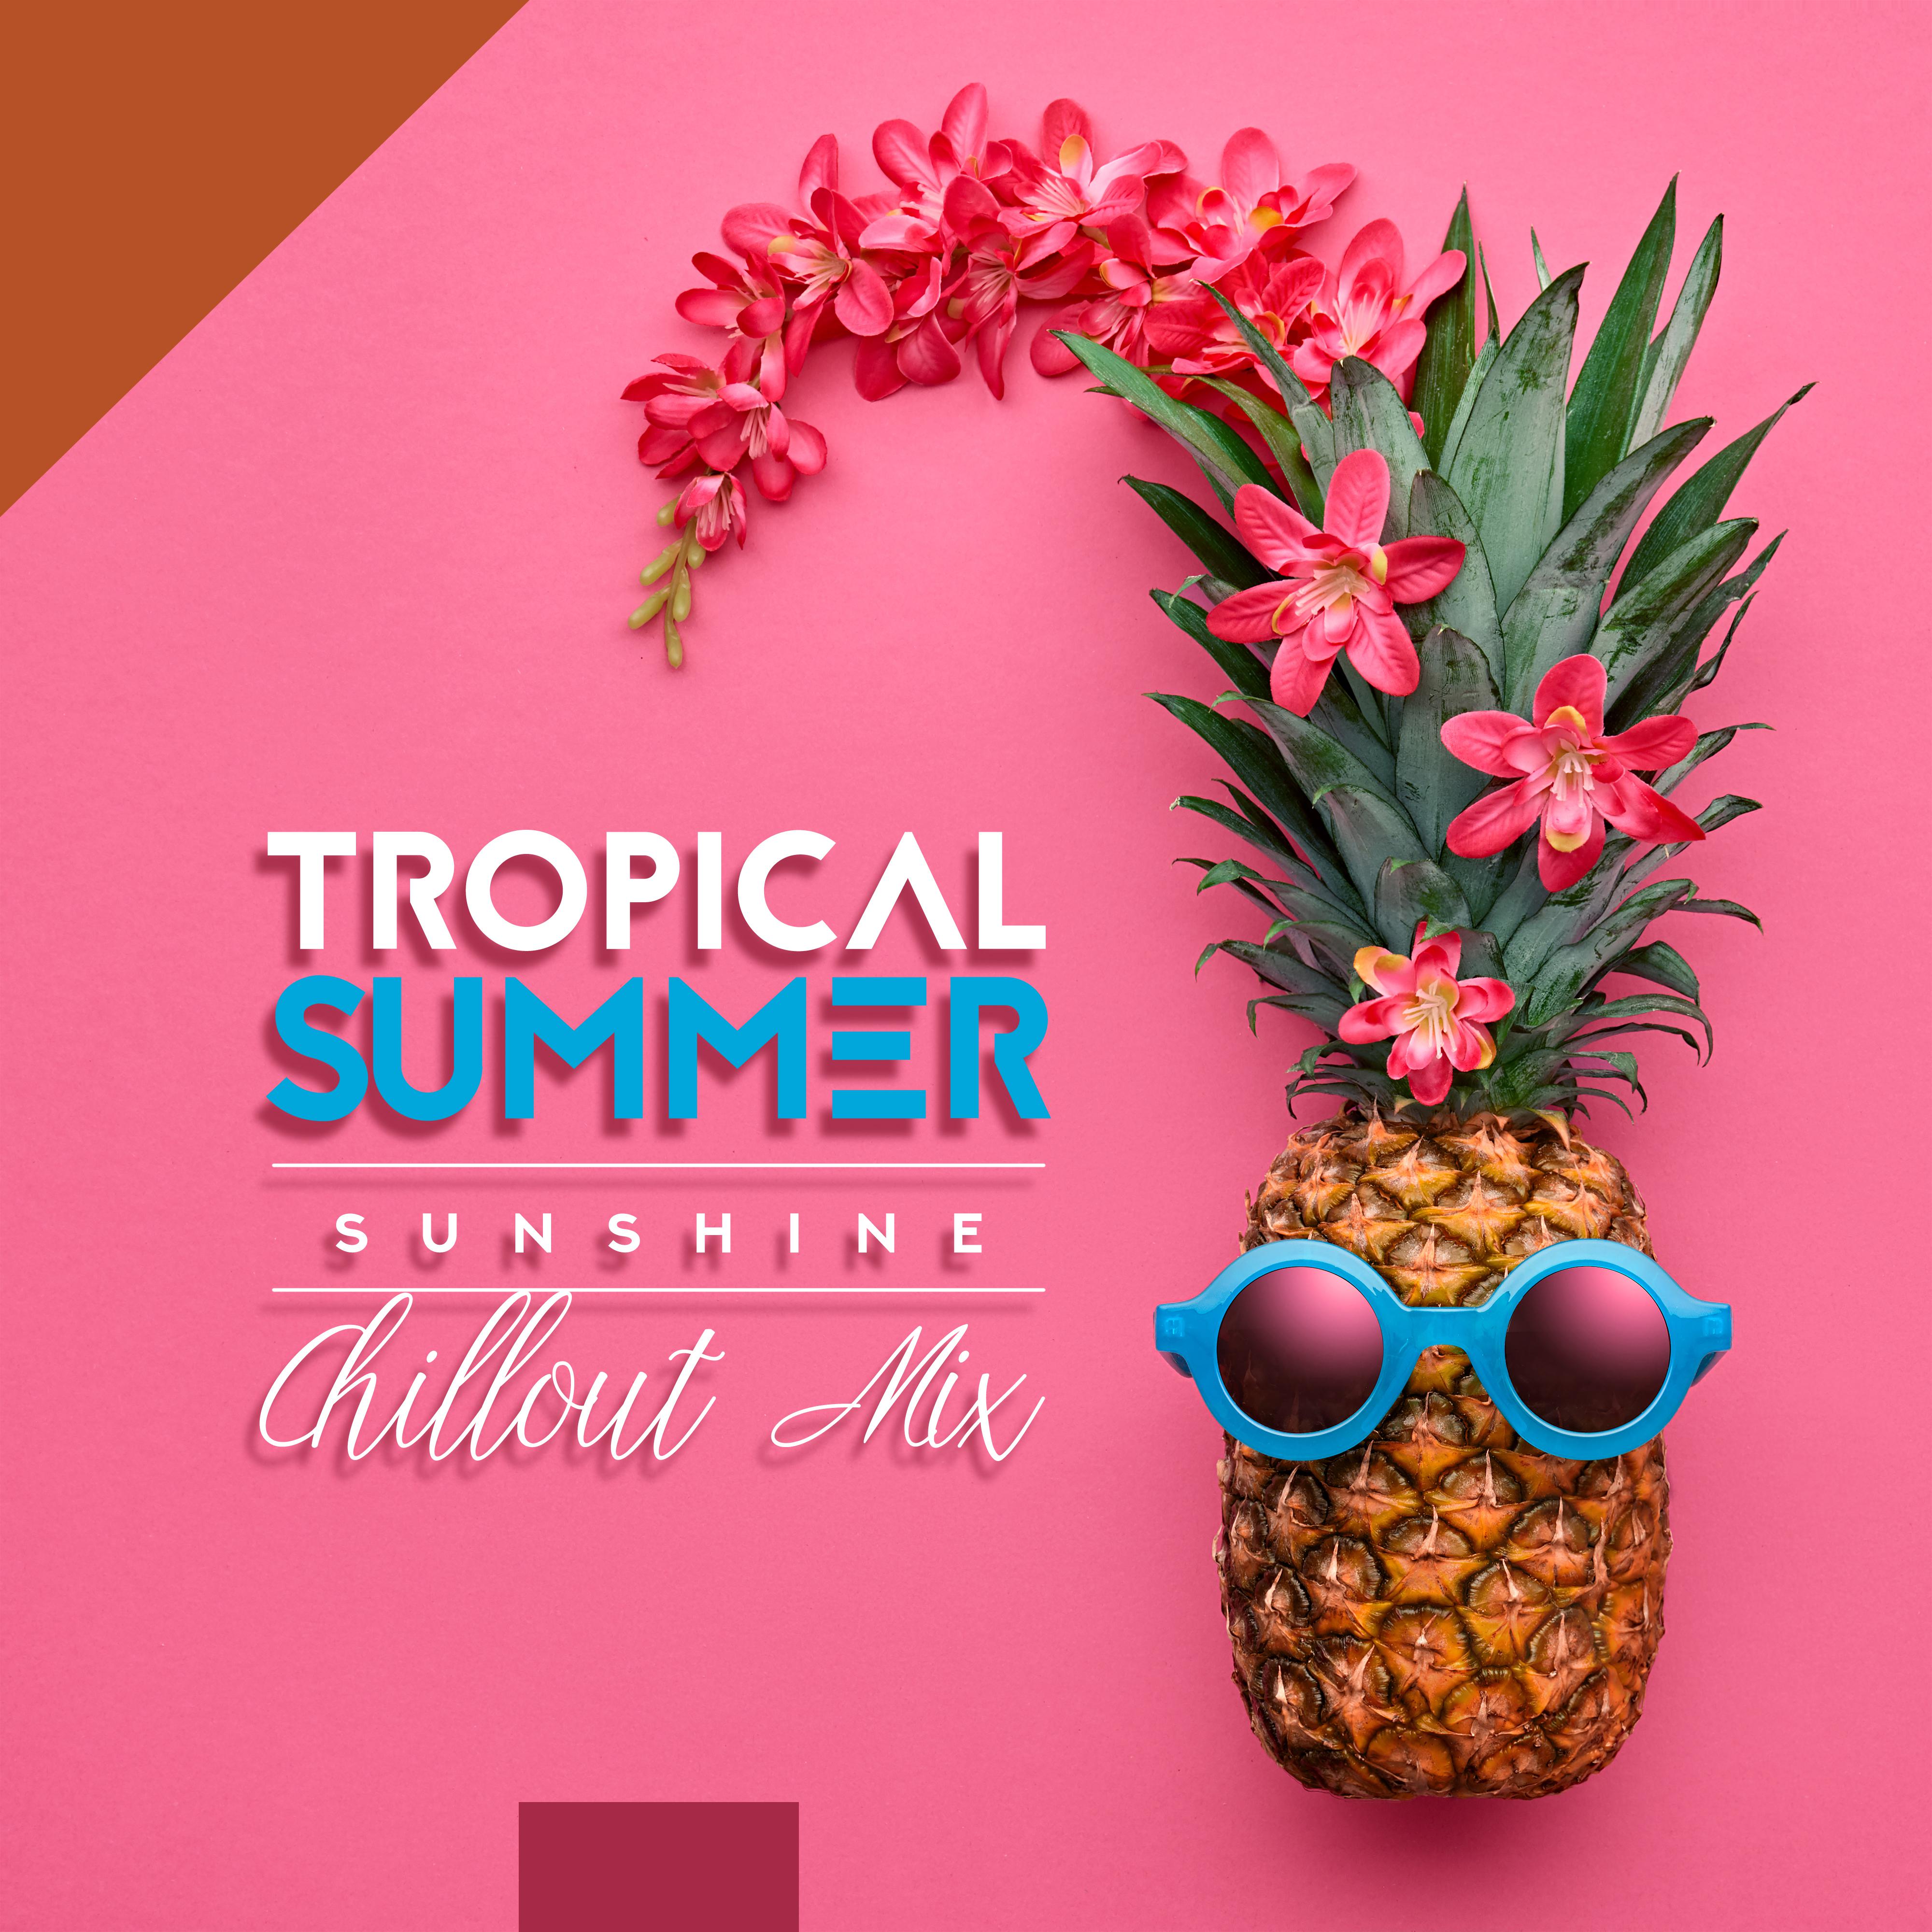 Tropical Summer Sunshine Chillout Mix – 2019 Best Holiday Chill Out Music, Beach Bar Cocktail Party, Total Relaxation Vibes